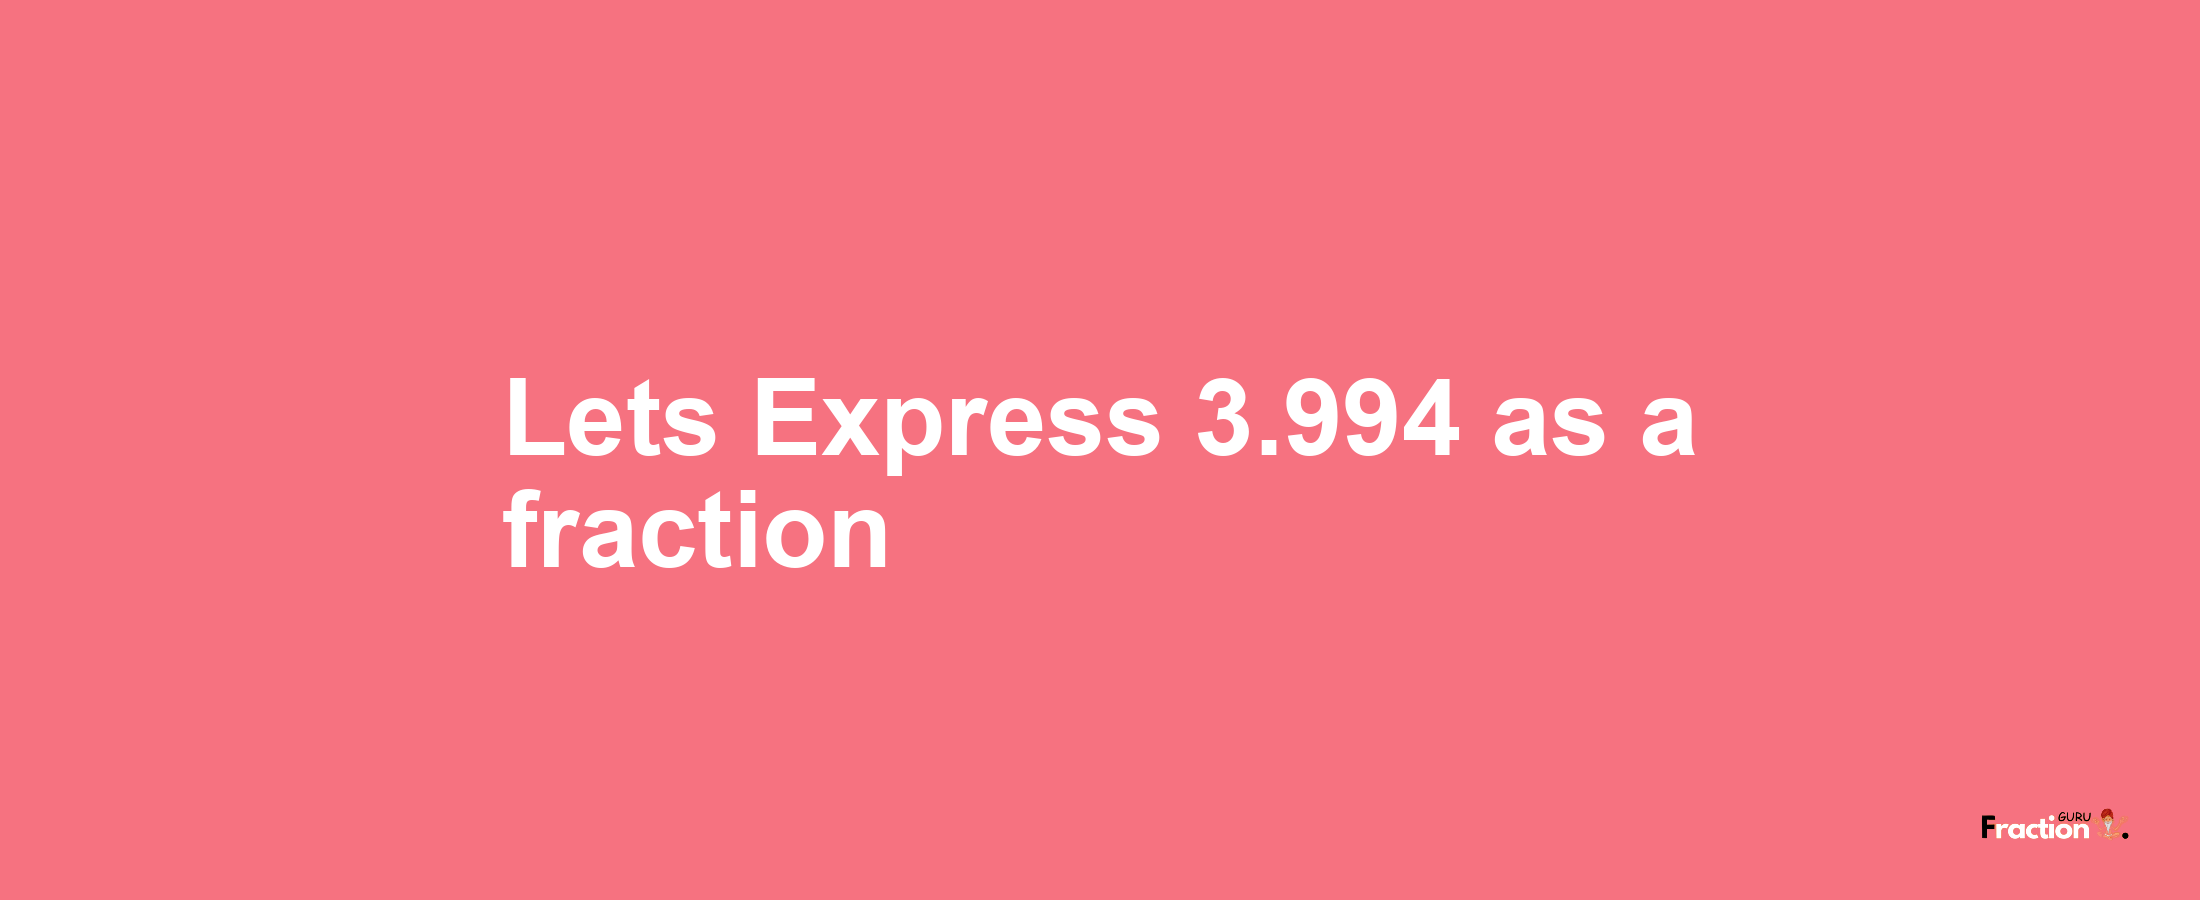 Lets Express 3.994 as afraction